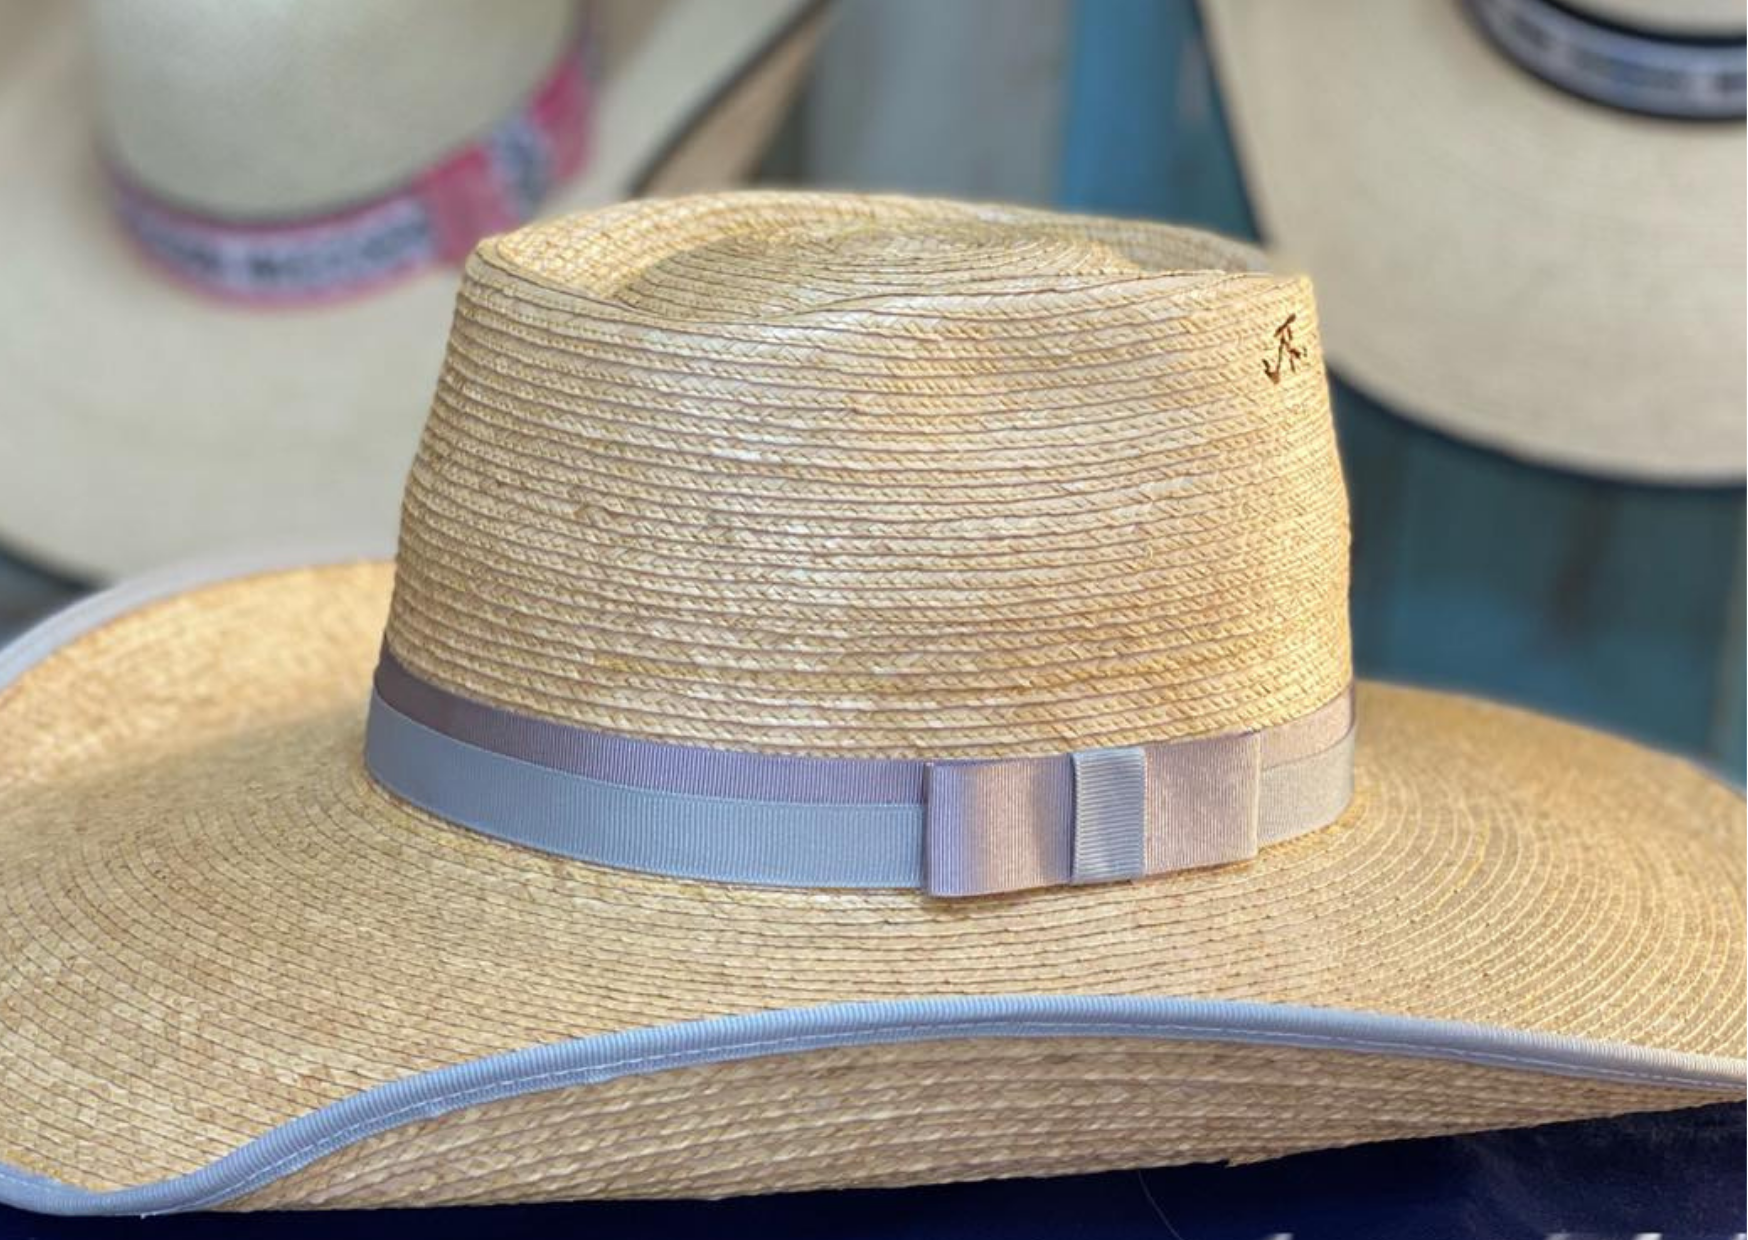 Jaxonbilt_Hats_are_Australian_made_palm_leaf_hats_and_crossbred_hats_for_cowgirls_and_cowboys_with_wide_brims_for_sun_protection_5”_brim_trim_on_edge_wide_crown_band_box_top_shape_ribbon_crown_band_with_a_bow_dark_oak